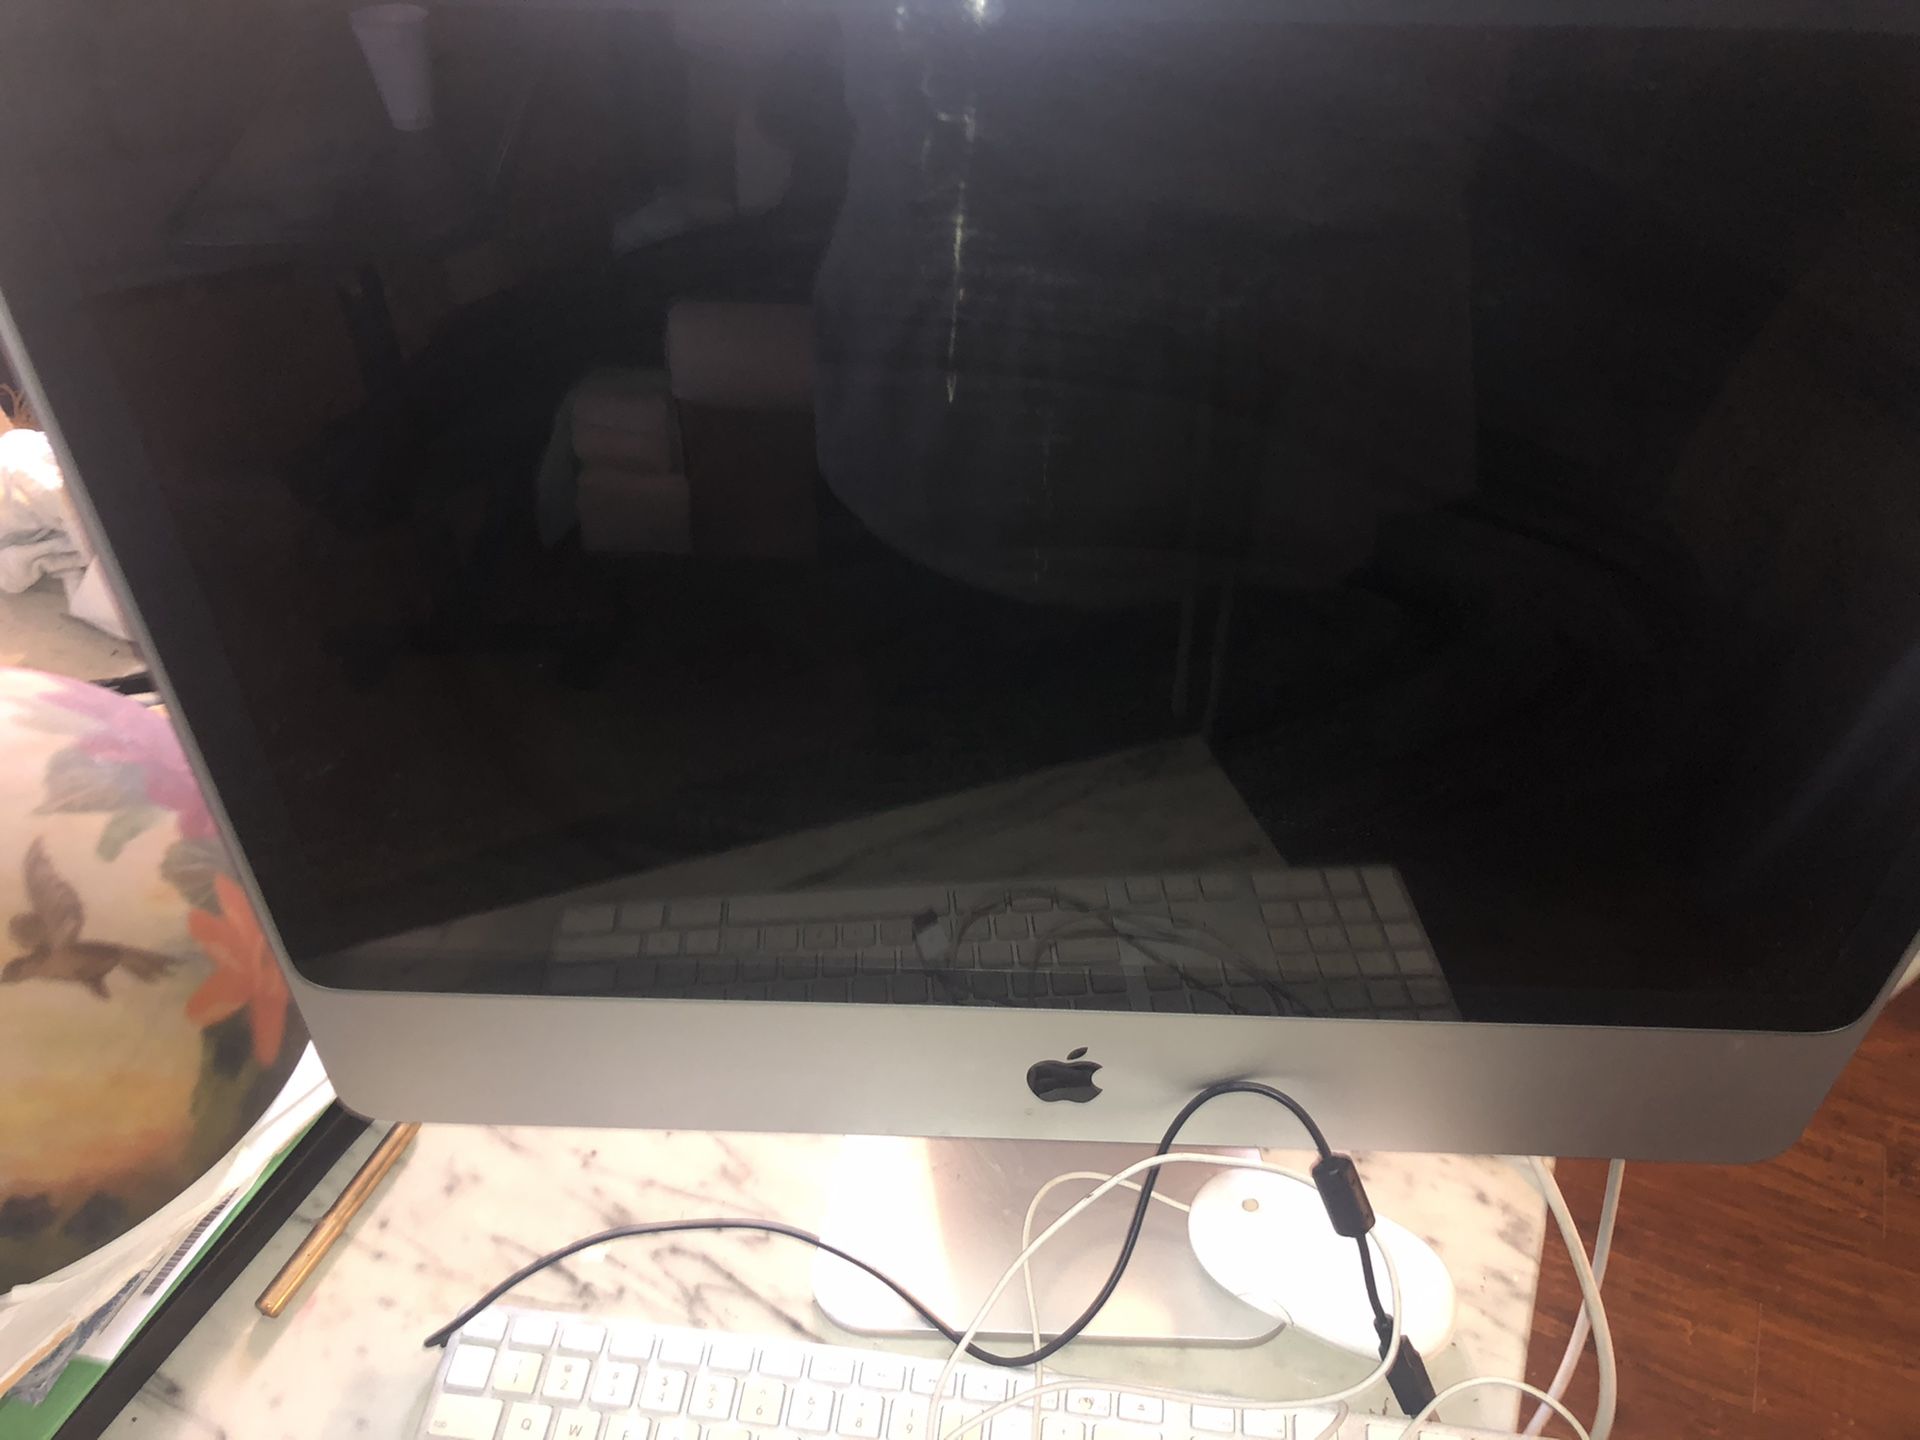 Apple monitor with keyboard